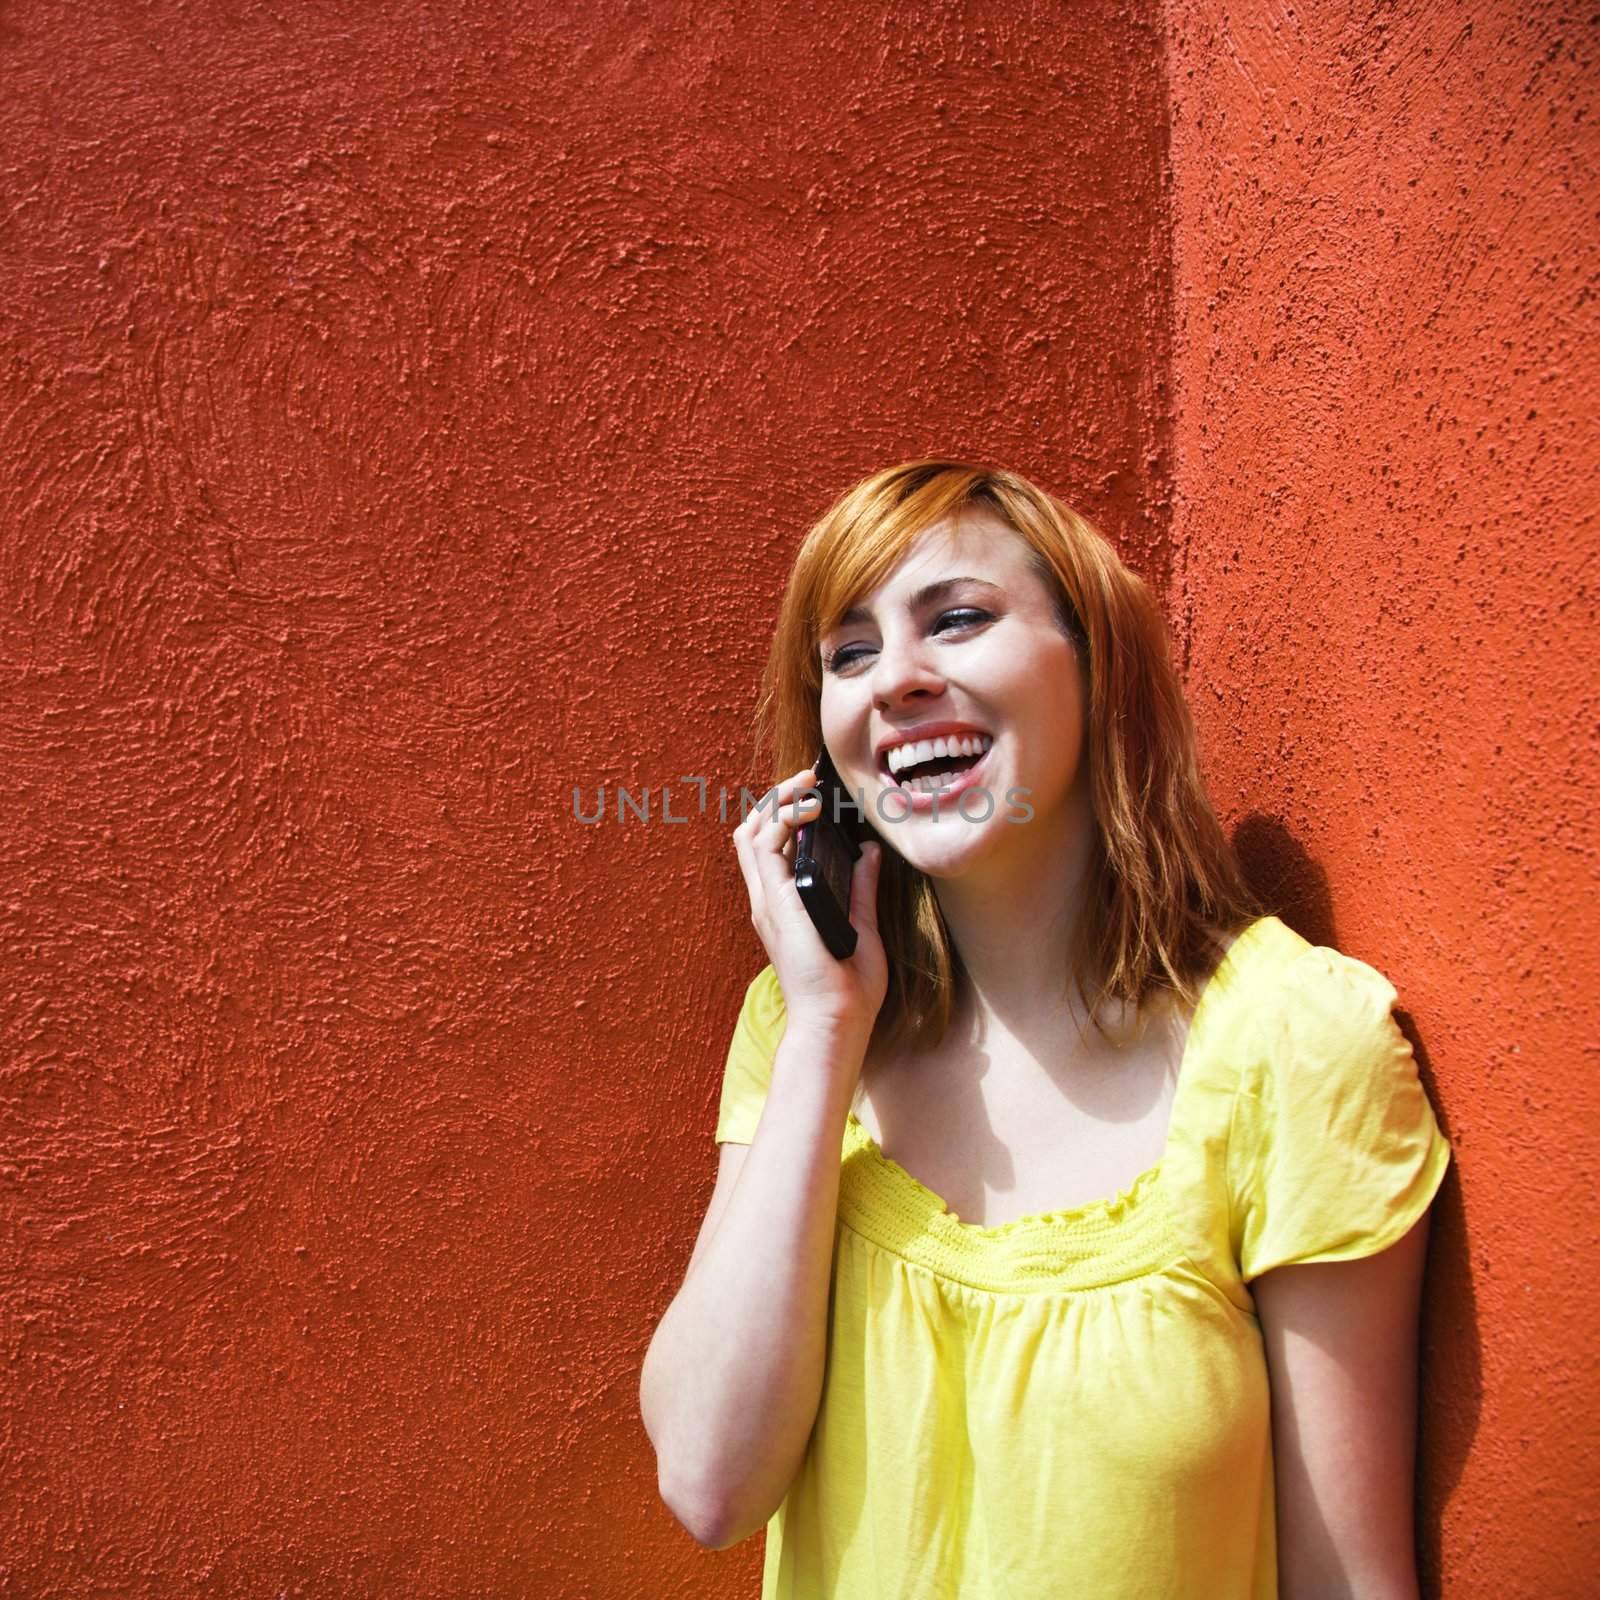 Smiling young redhead female talking on cellphone.